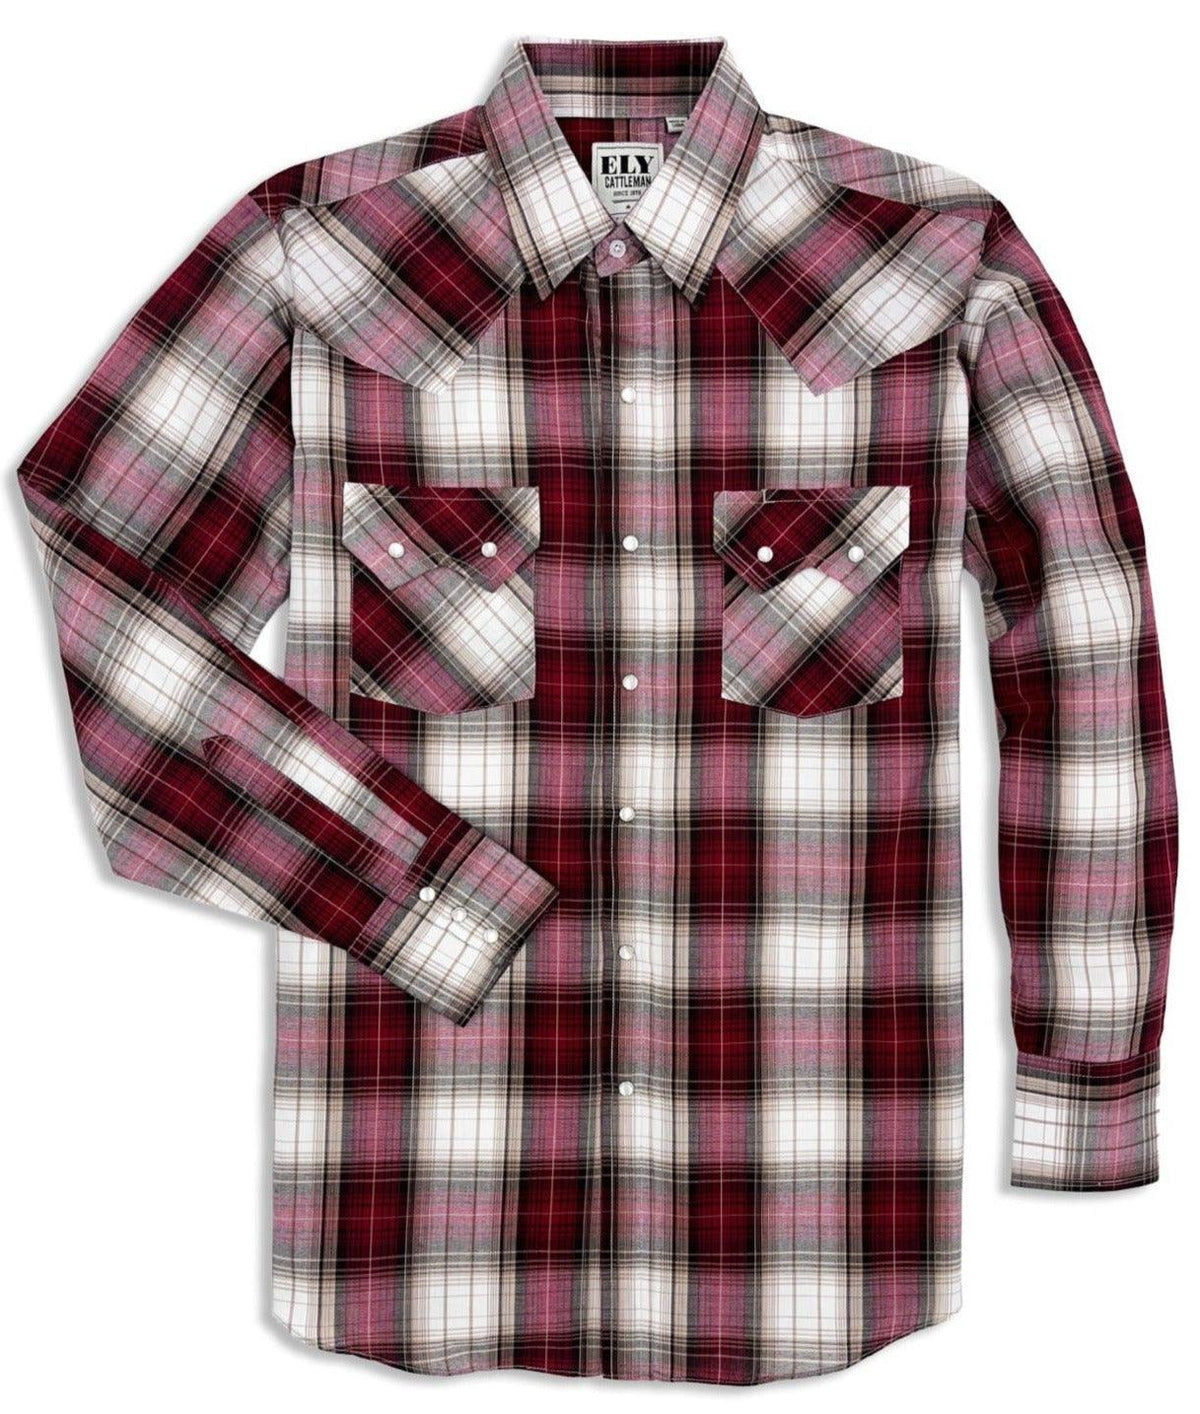 Ely Cattleman mens long-sleeve textured plaid Shirt Red - Flyclothing LLC